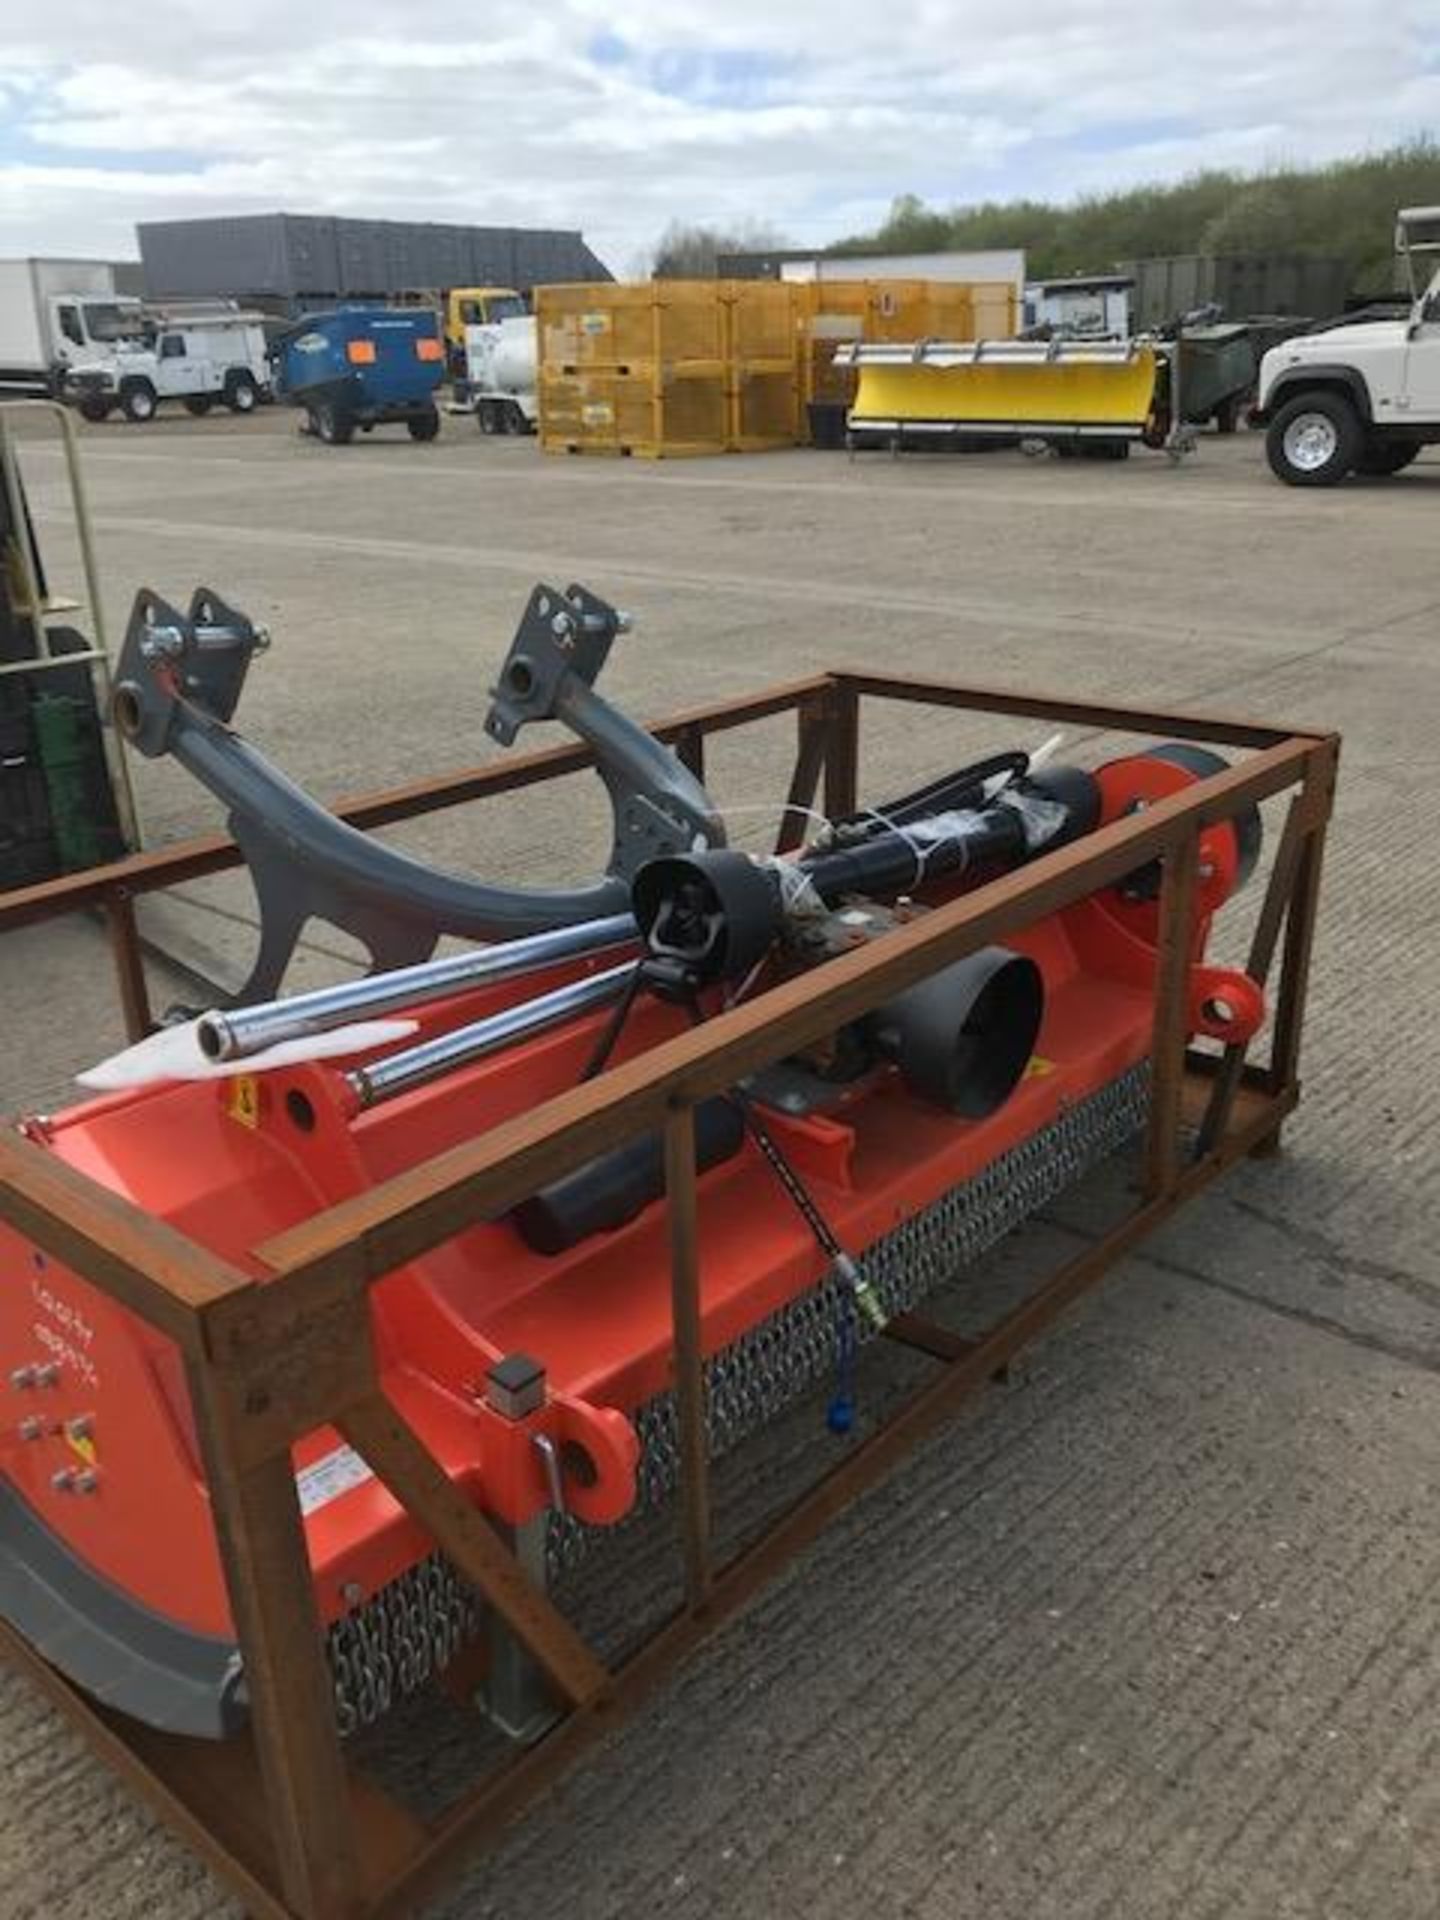 New and Unused Manufactured 2019 Flail Mower with Roller and Hydraulic Side shift - Image 3 of 6